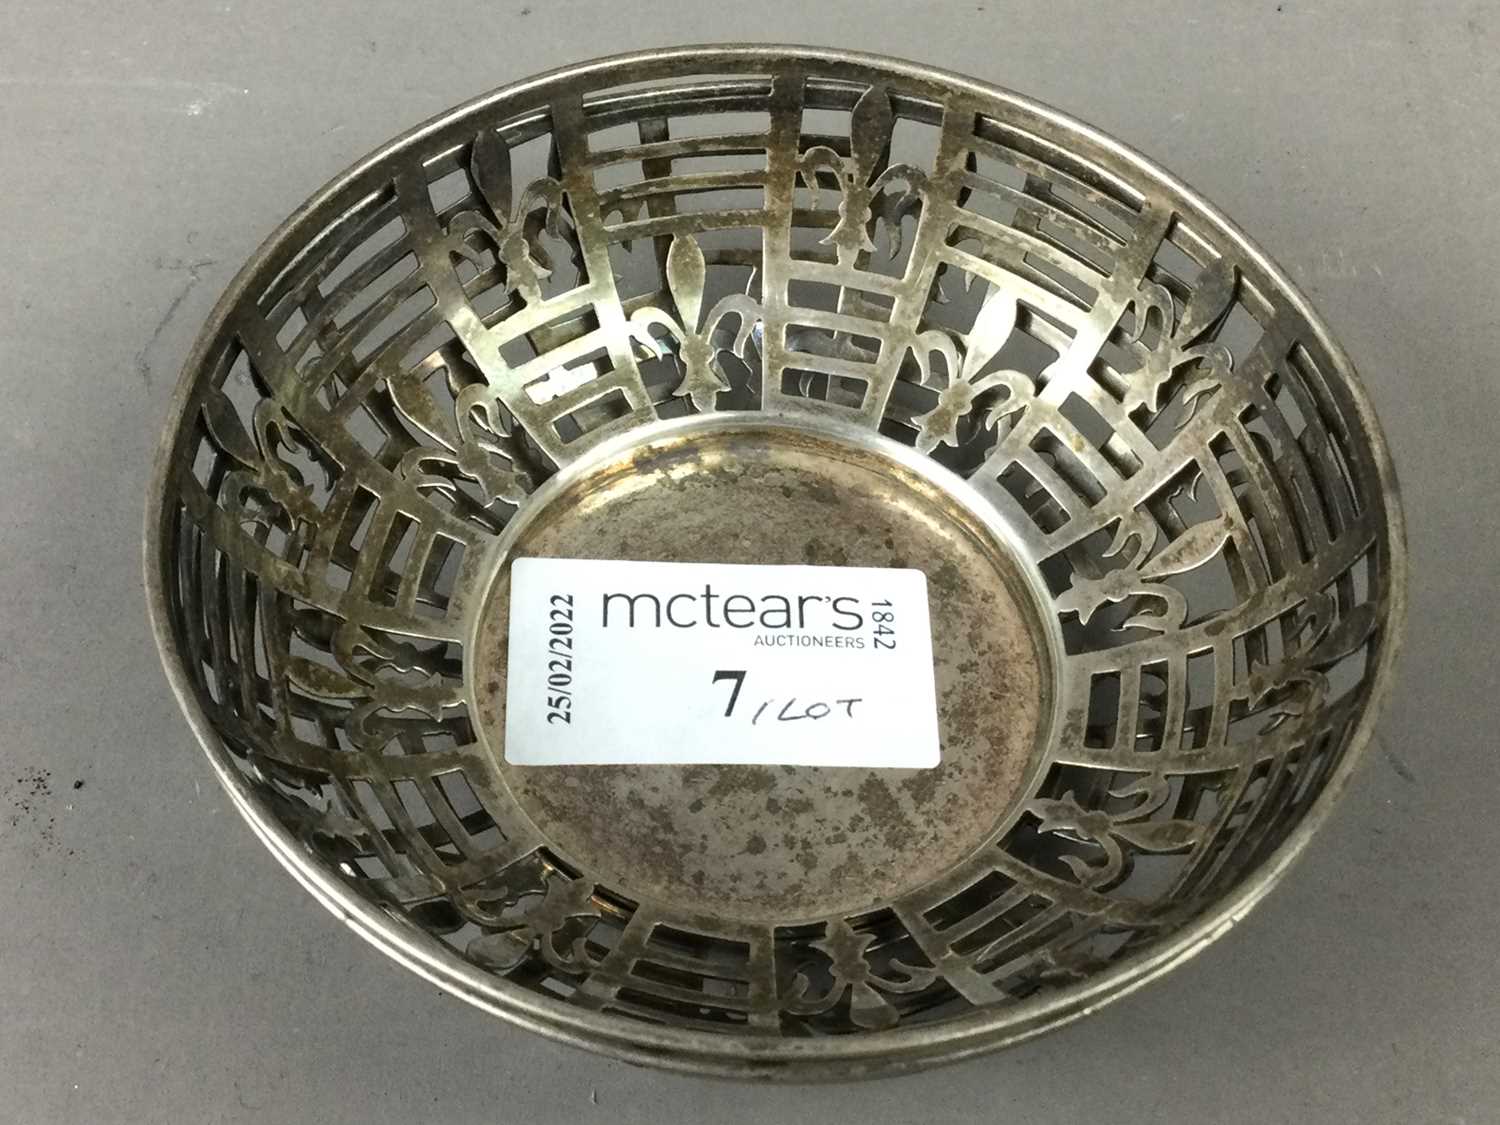 Lot 7 - A PAIR OF EDWARD VII SILVER BONBON DISHES ALONG WITH PLATED ITEMS